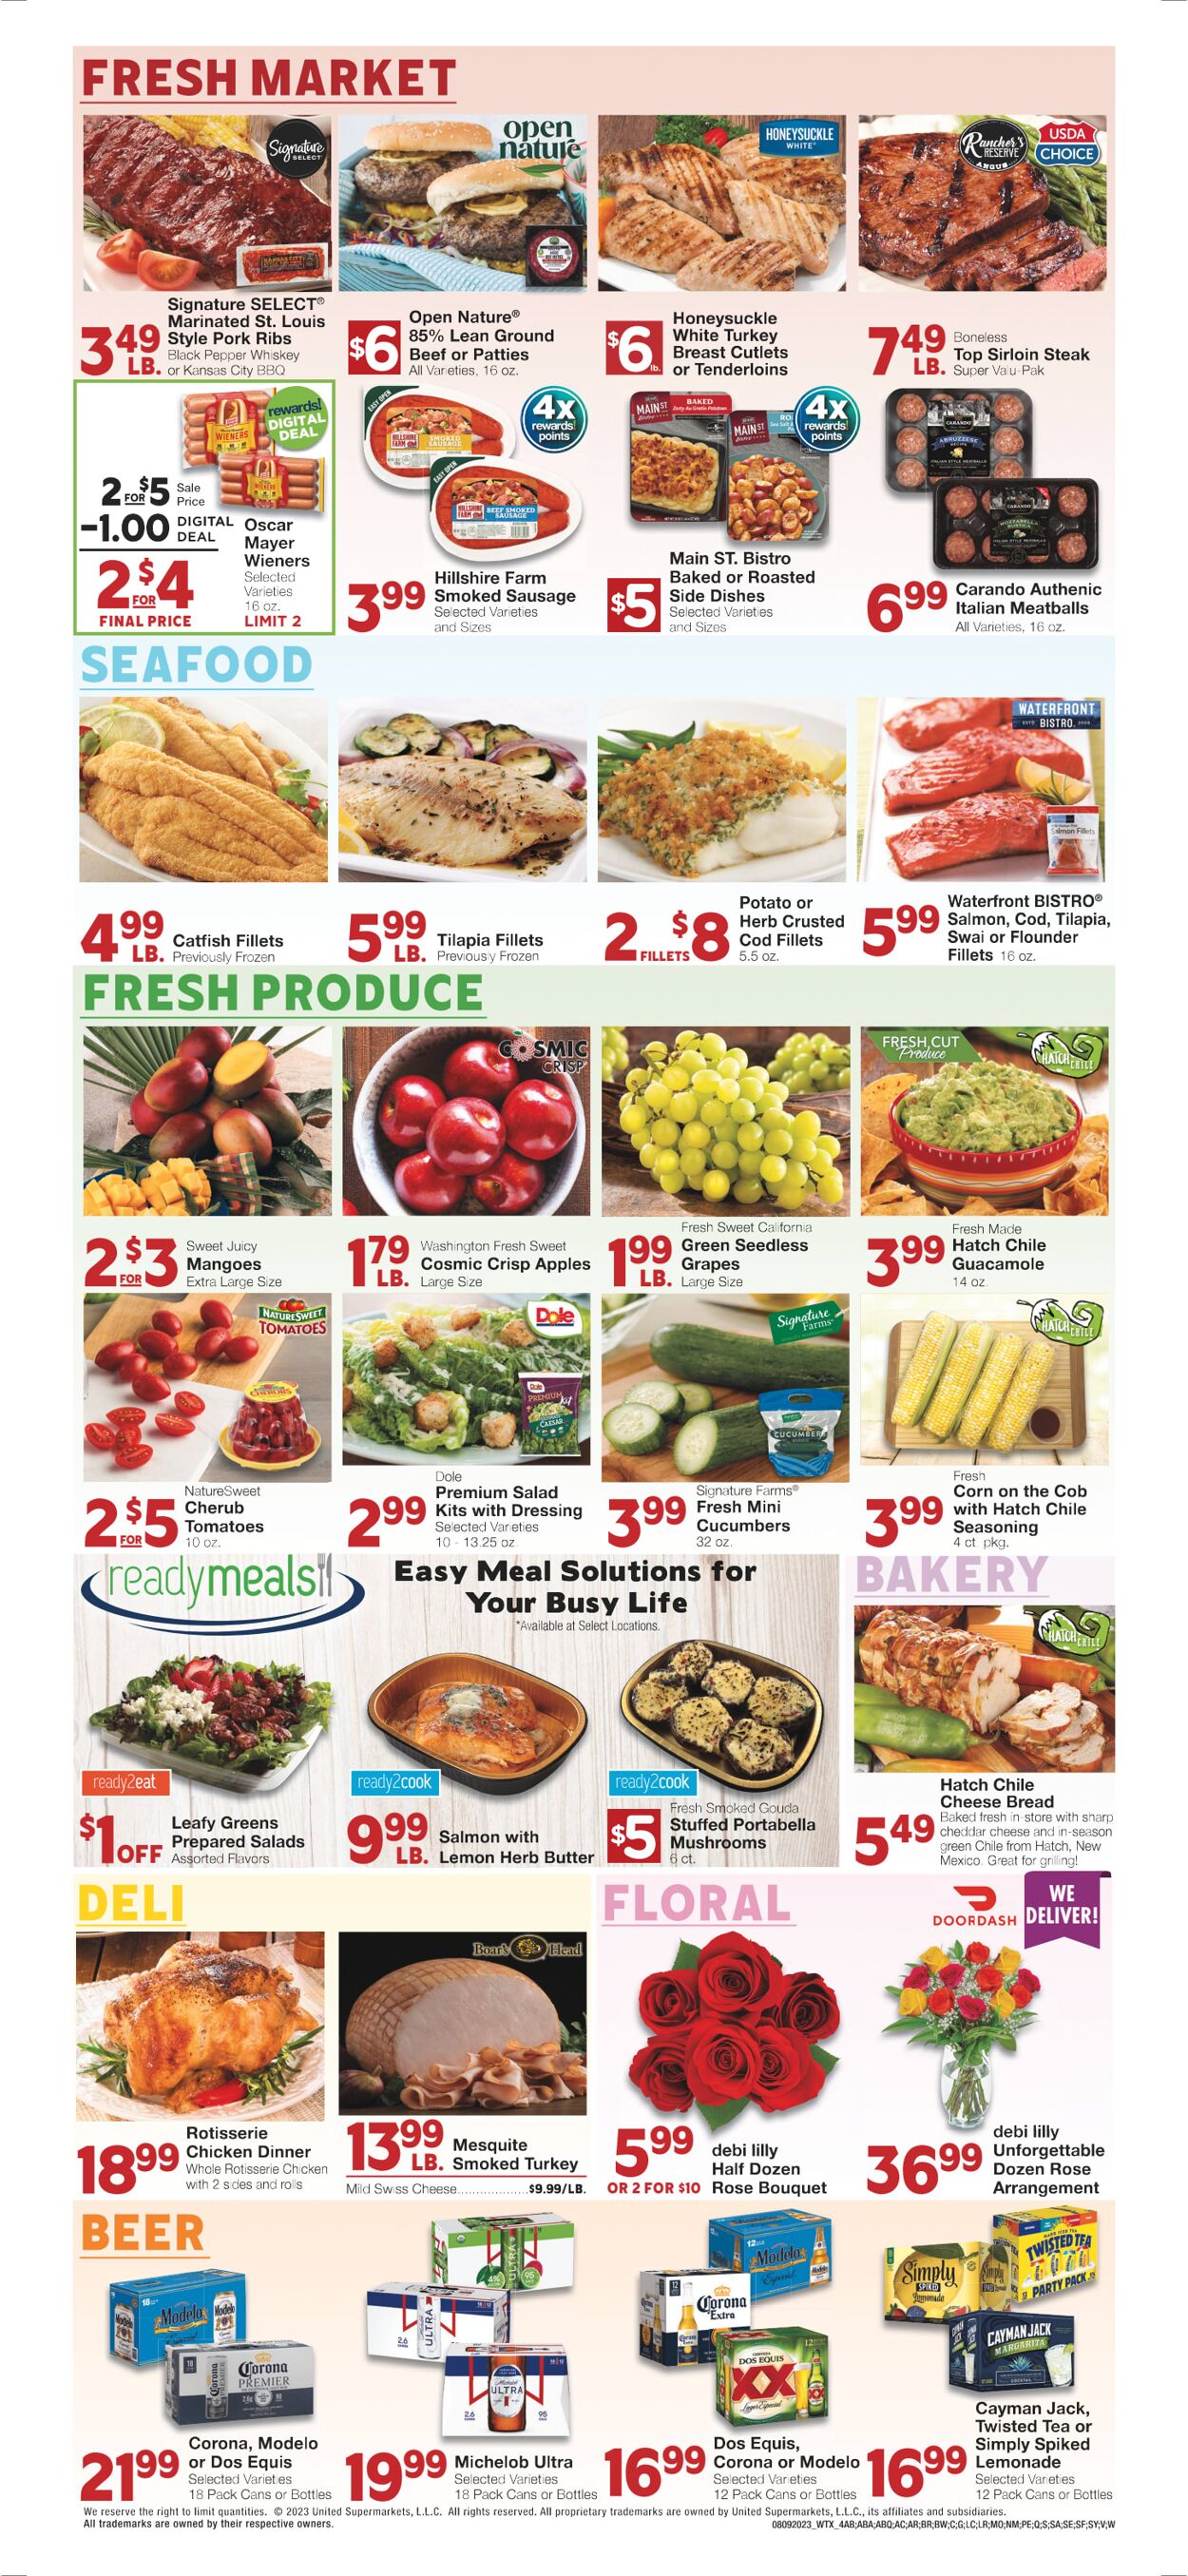 Weekly ad United Supermarkets 08/08/2023 - 08/15/2023